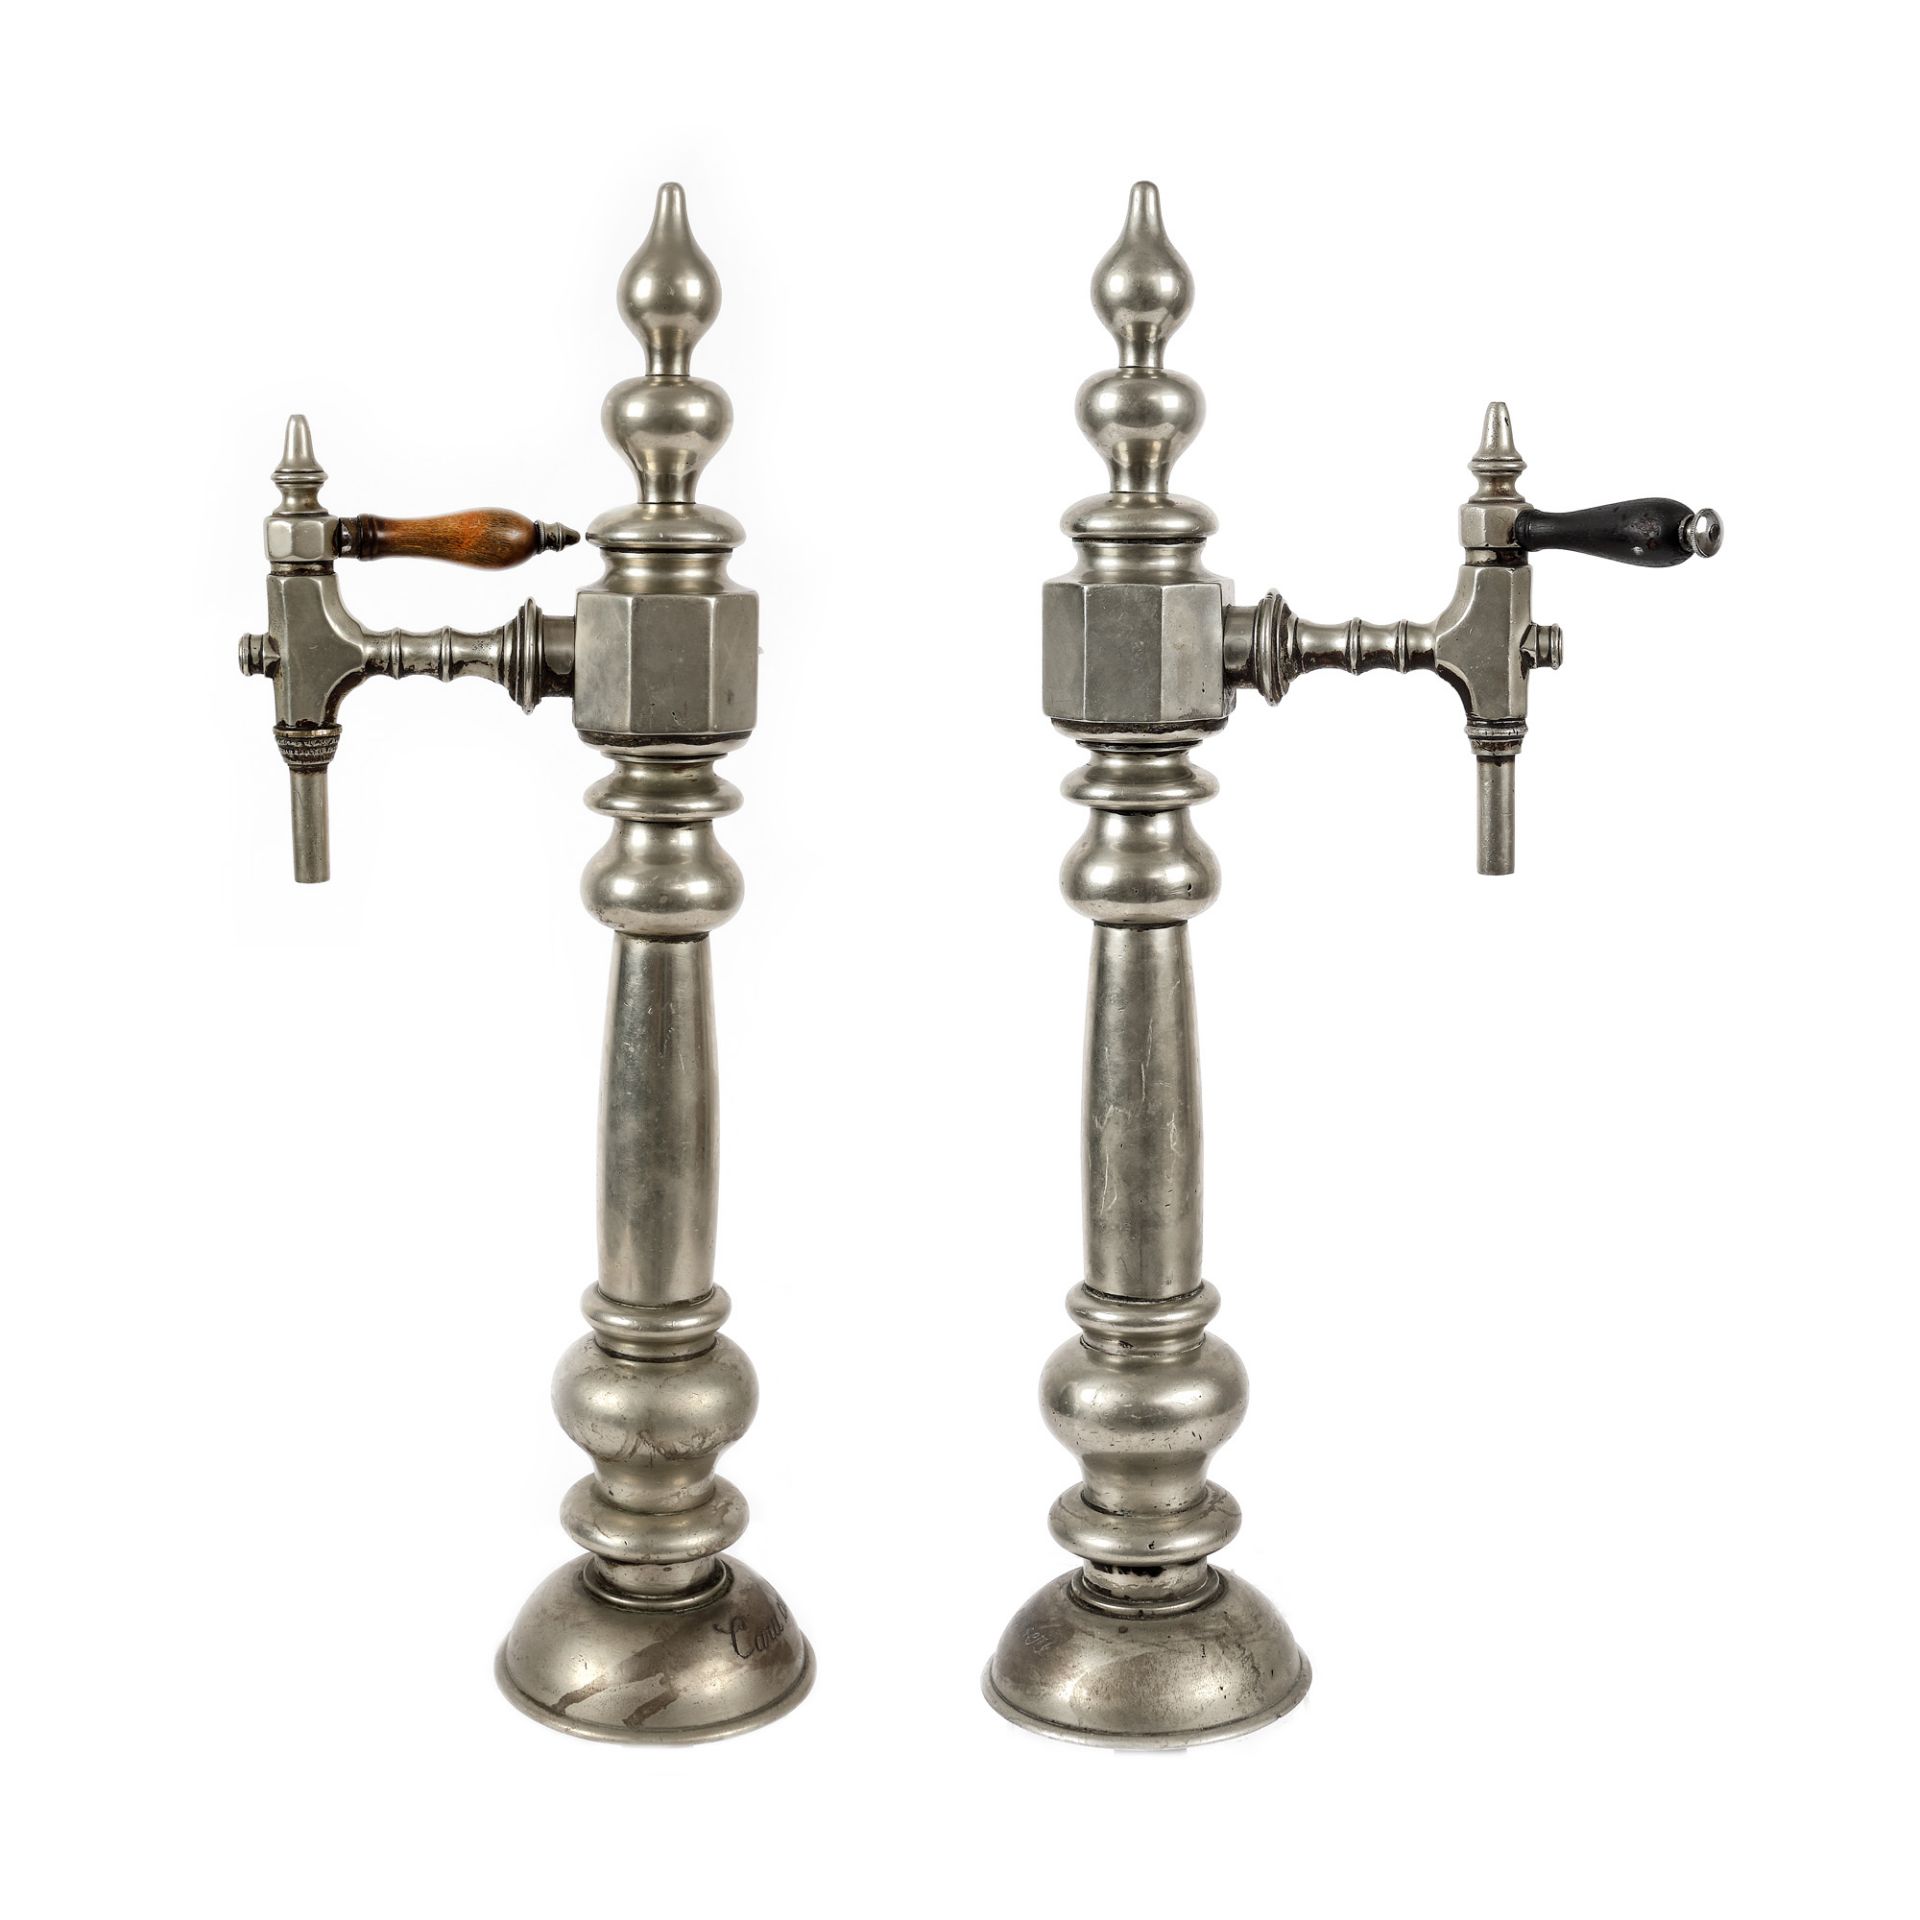 Two beer dispensers, with Caru cu bere restaurant brand, early 20th century